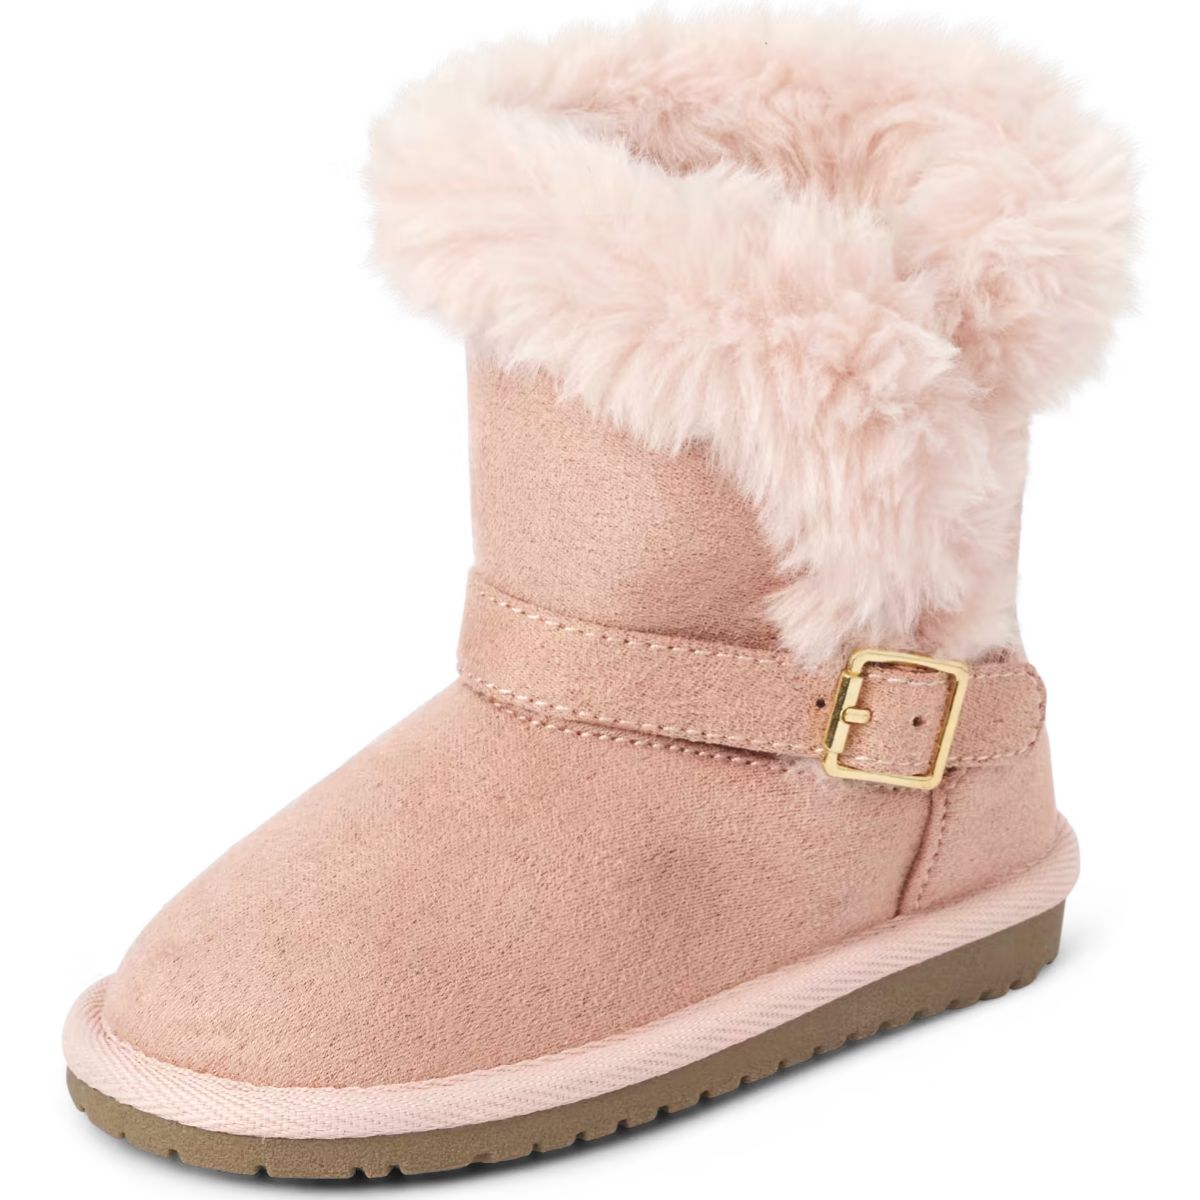 The Children's Place Girl's Warm Lightweight Winter Boot with faux fur trim and a cute gold buckle at ankle